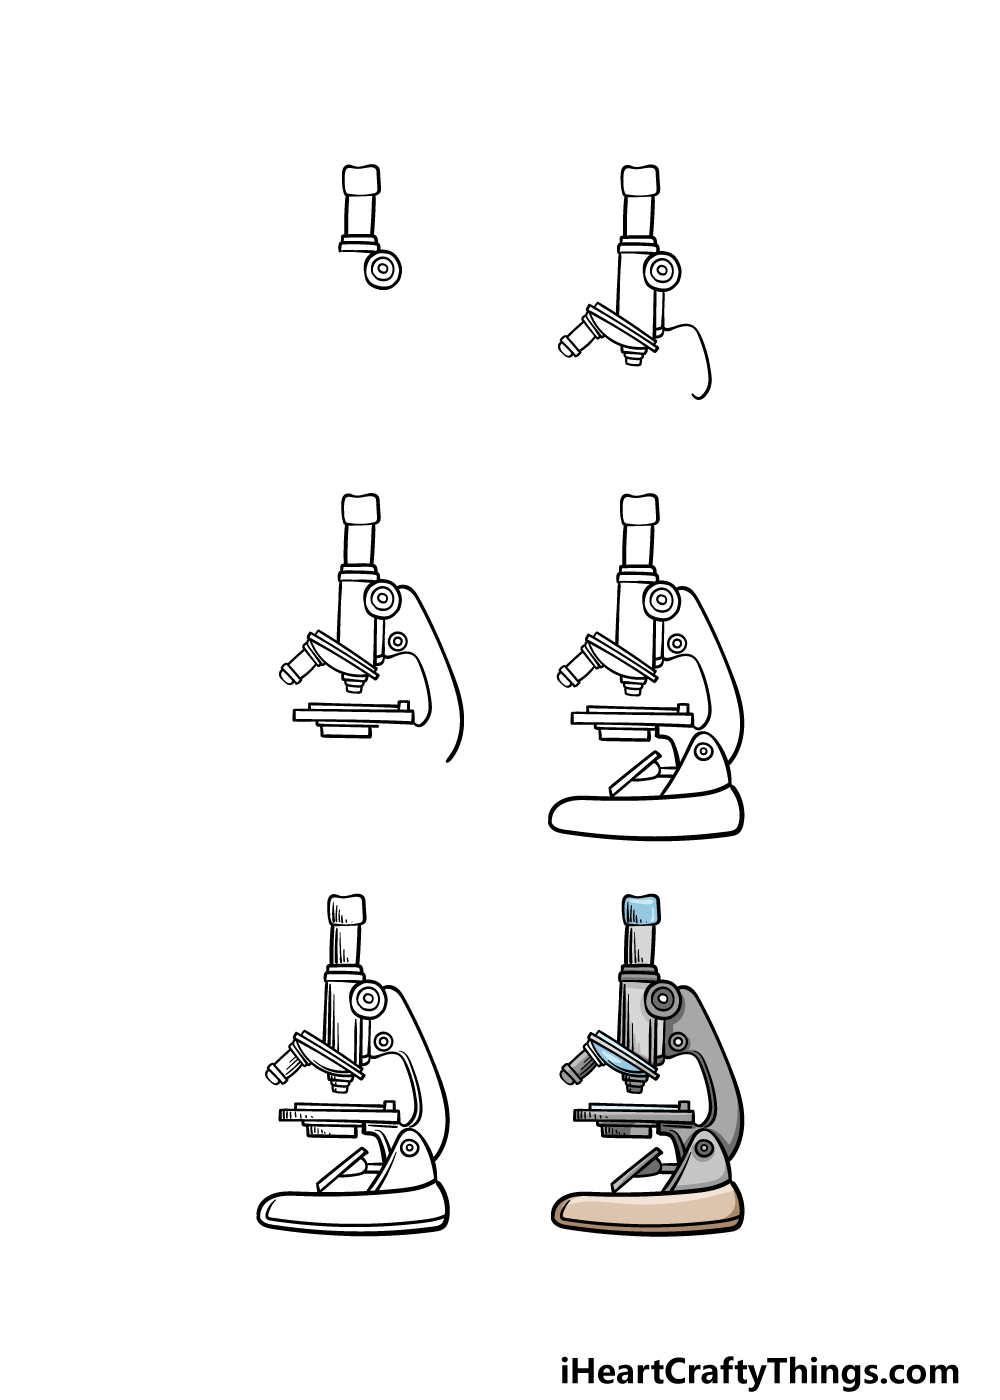 how to draw a microscope in 6 steps